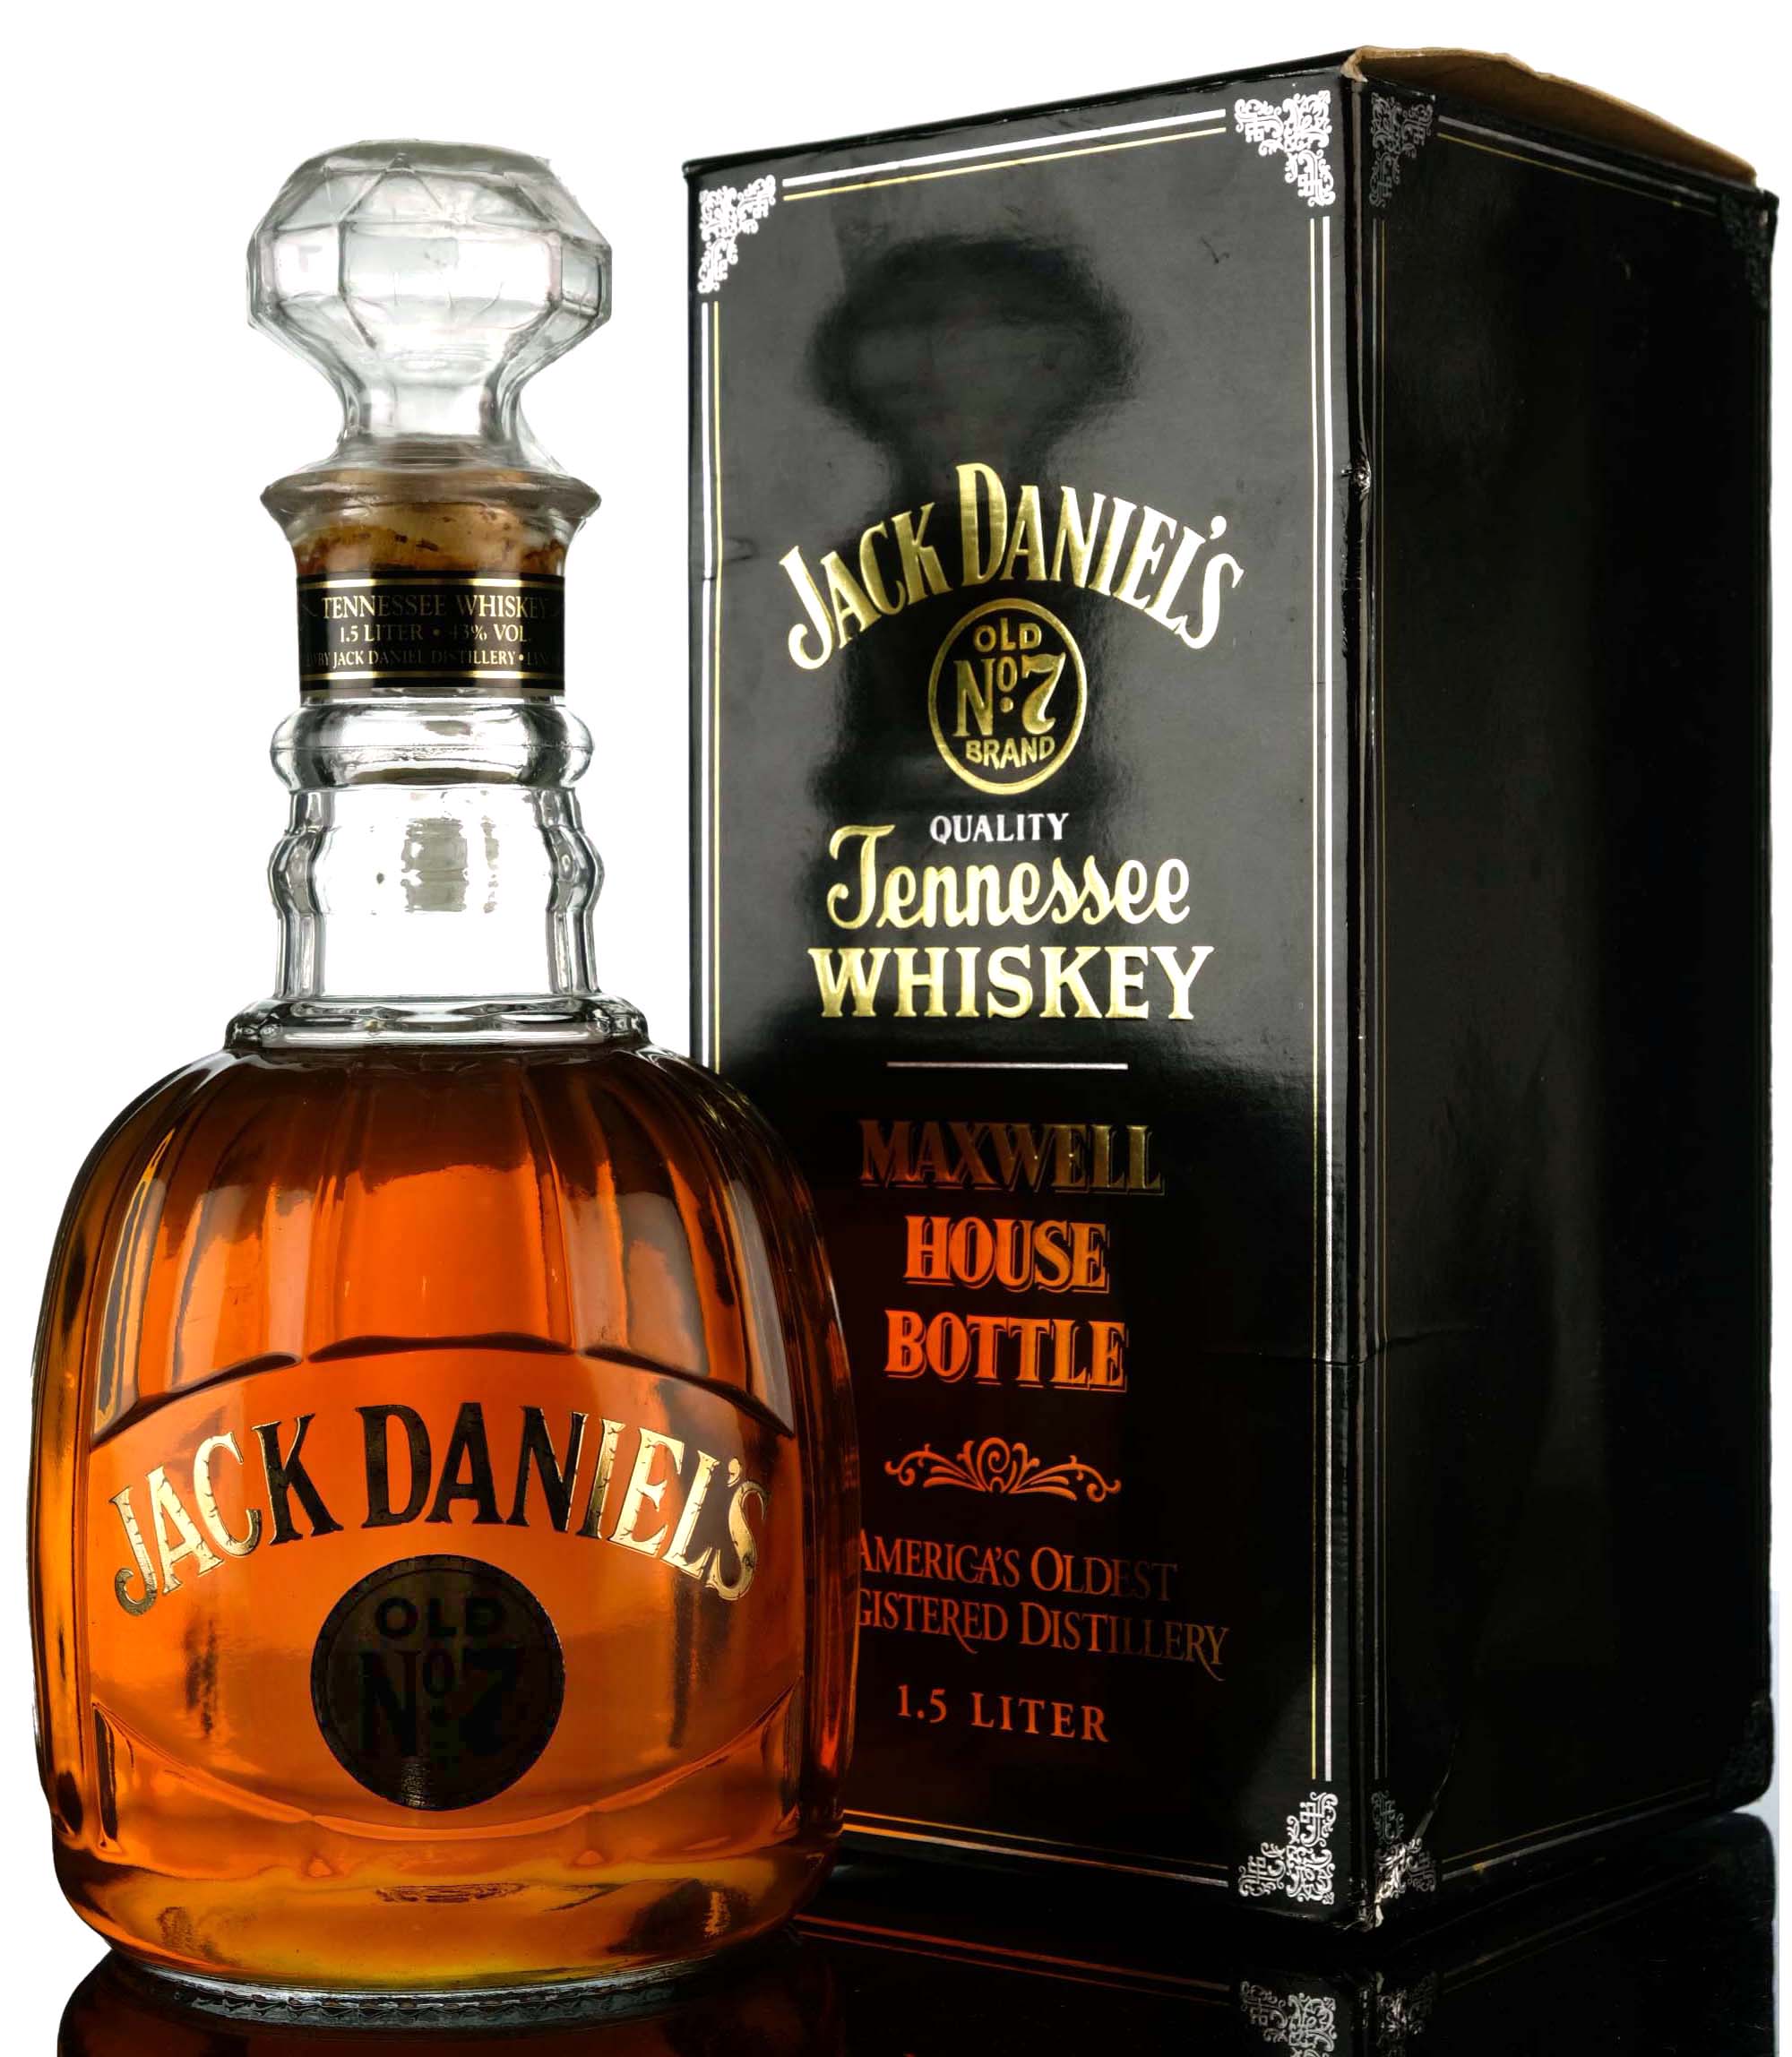 Jack Daniels Old No.7 Maxwell House Bottle - 1.5 Litres